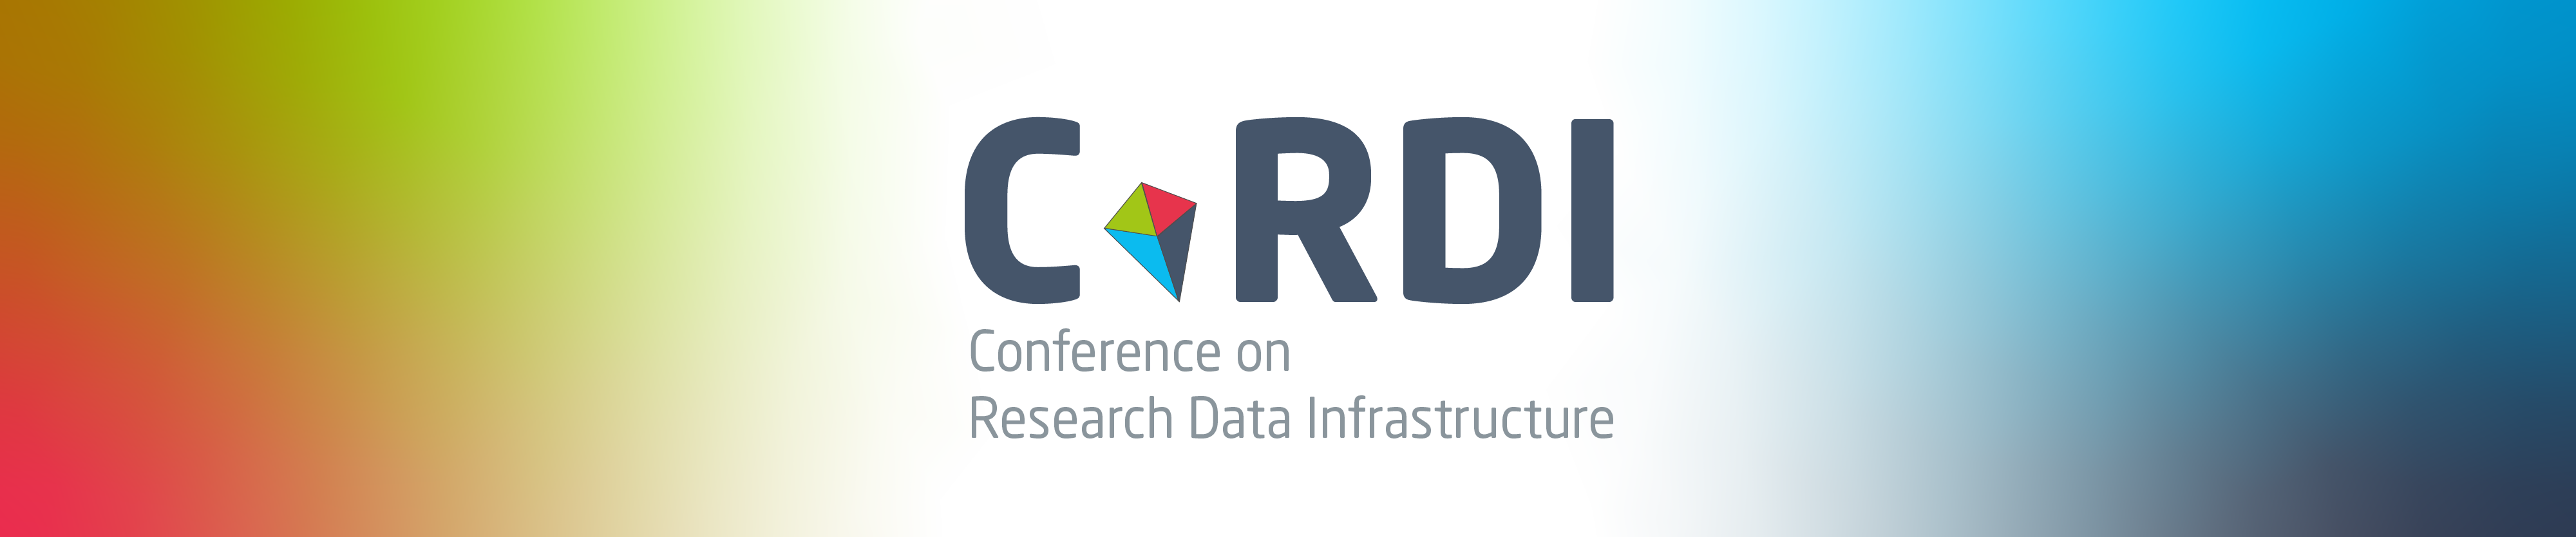 Logo of the Conference on Research Data Infrastructure